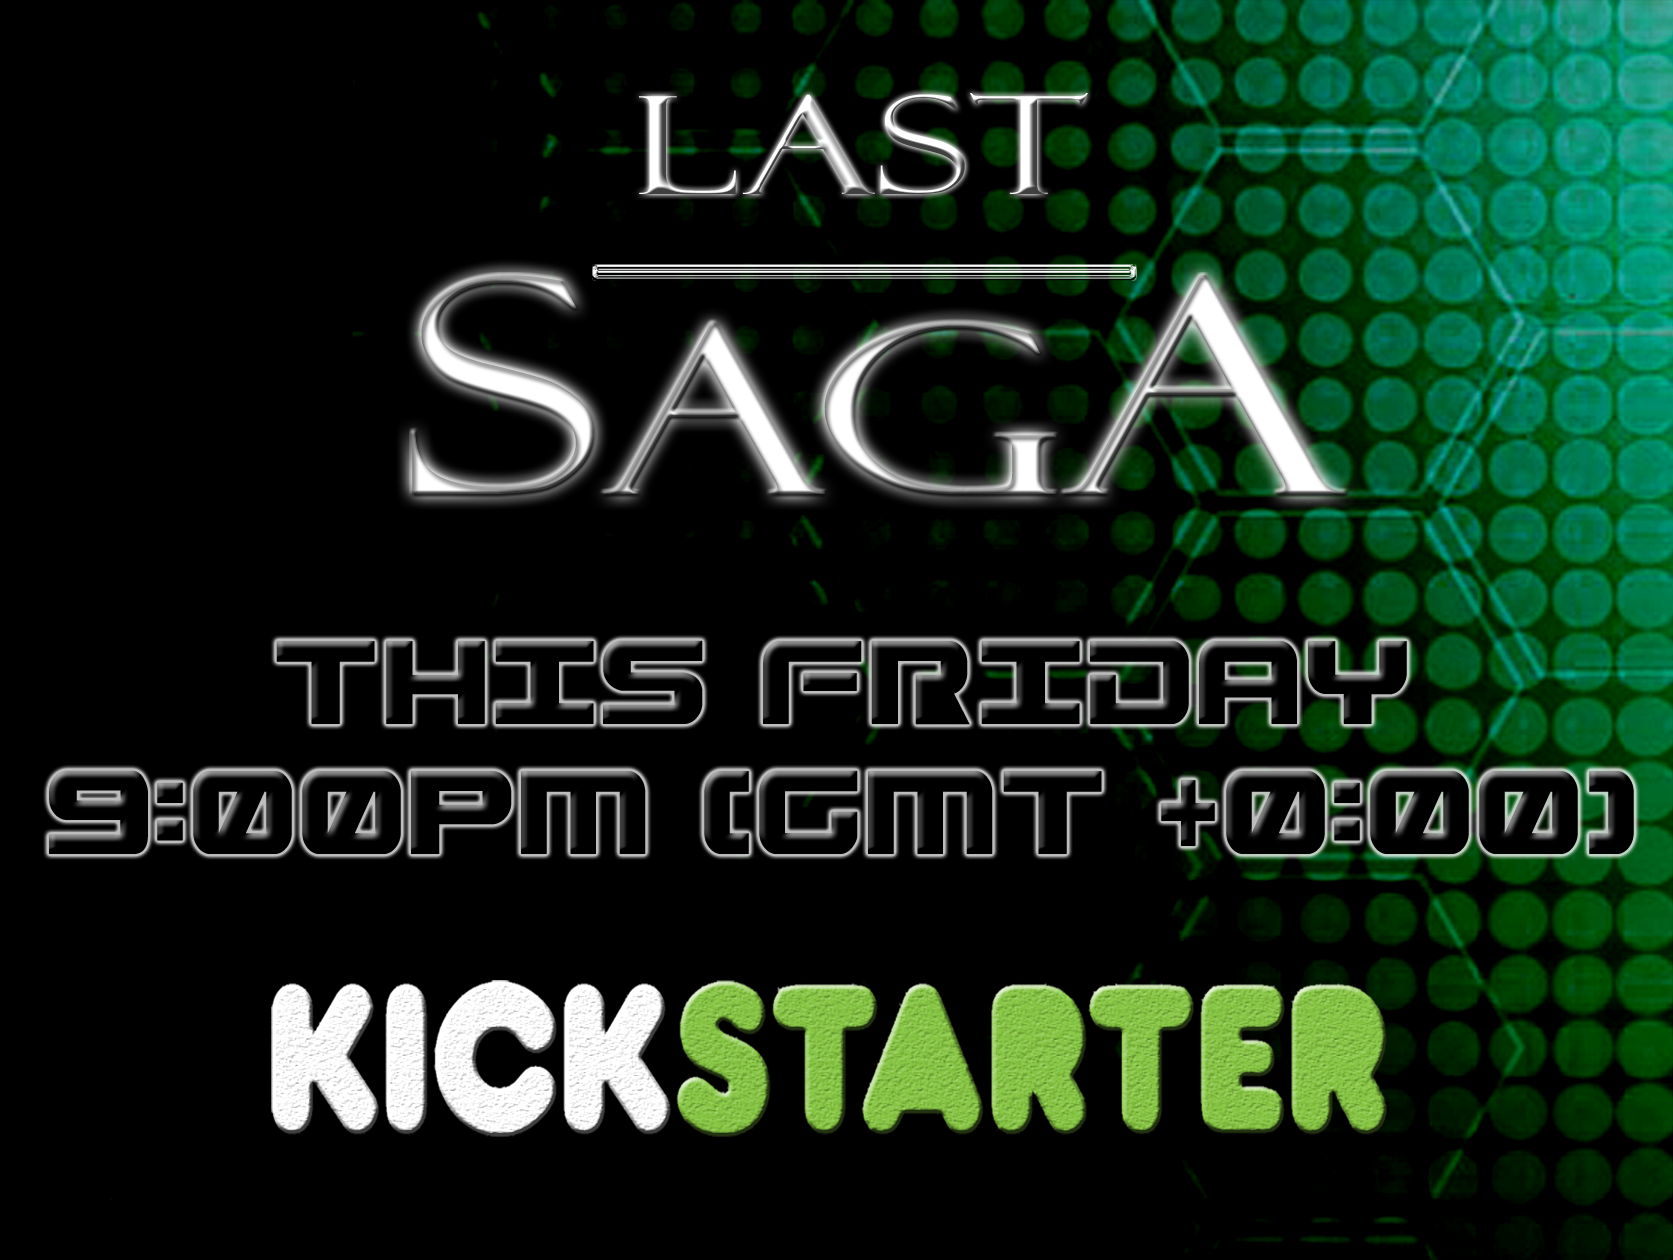 The Last Saga Kickstarter will be launched today!